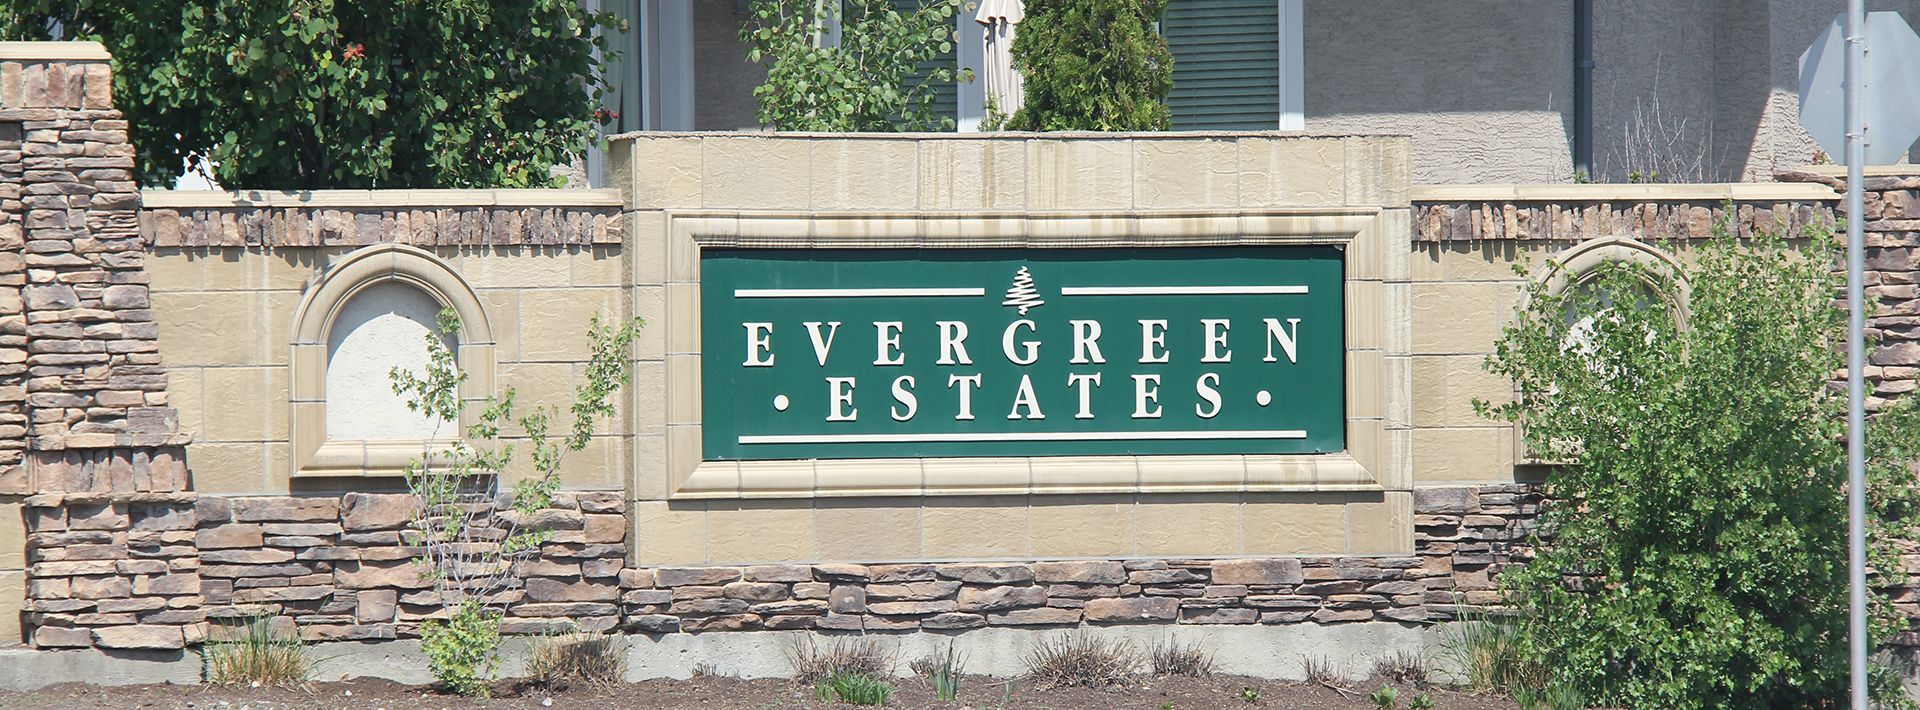 A sign for Evergreen Estates is on a stone wall